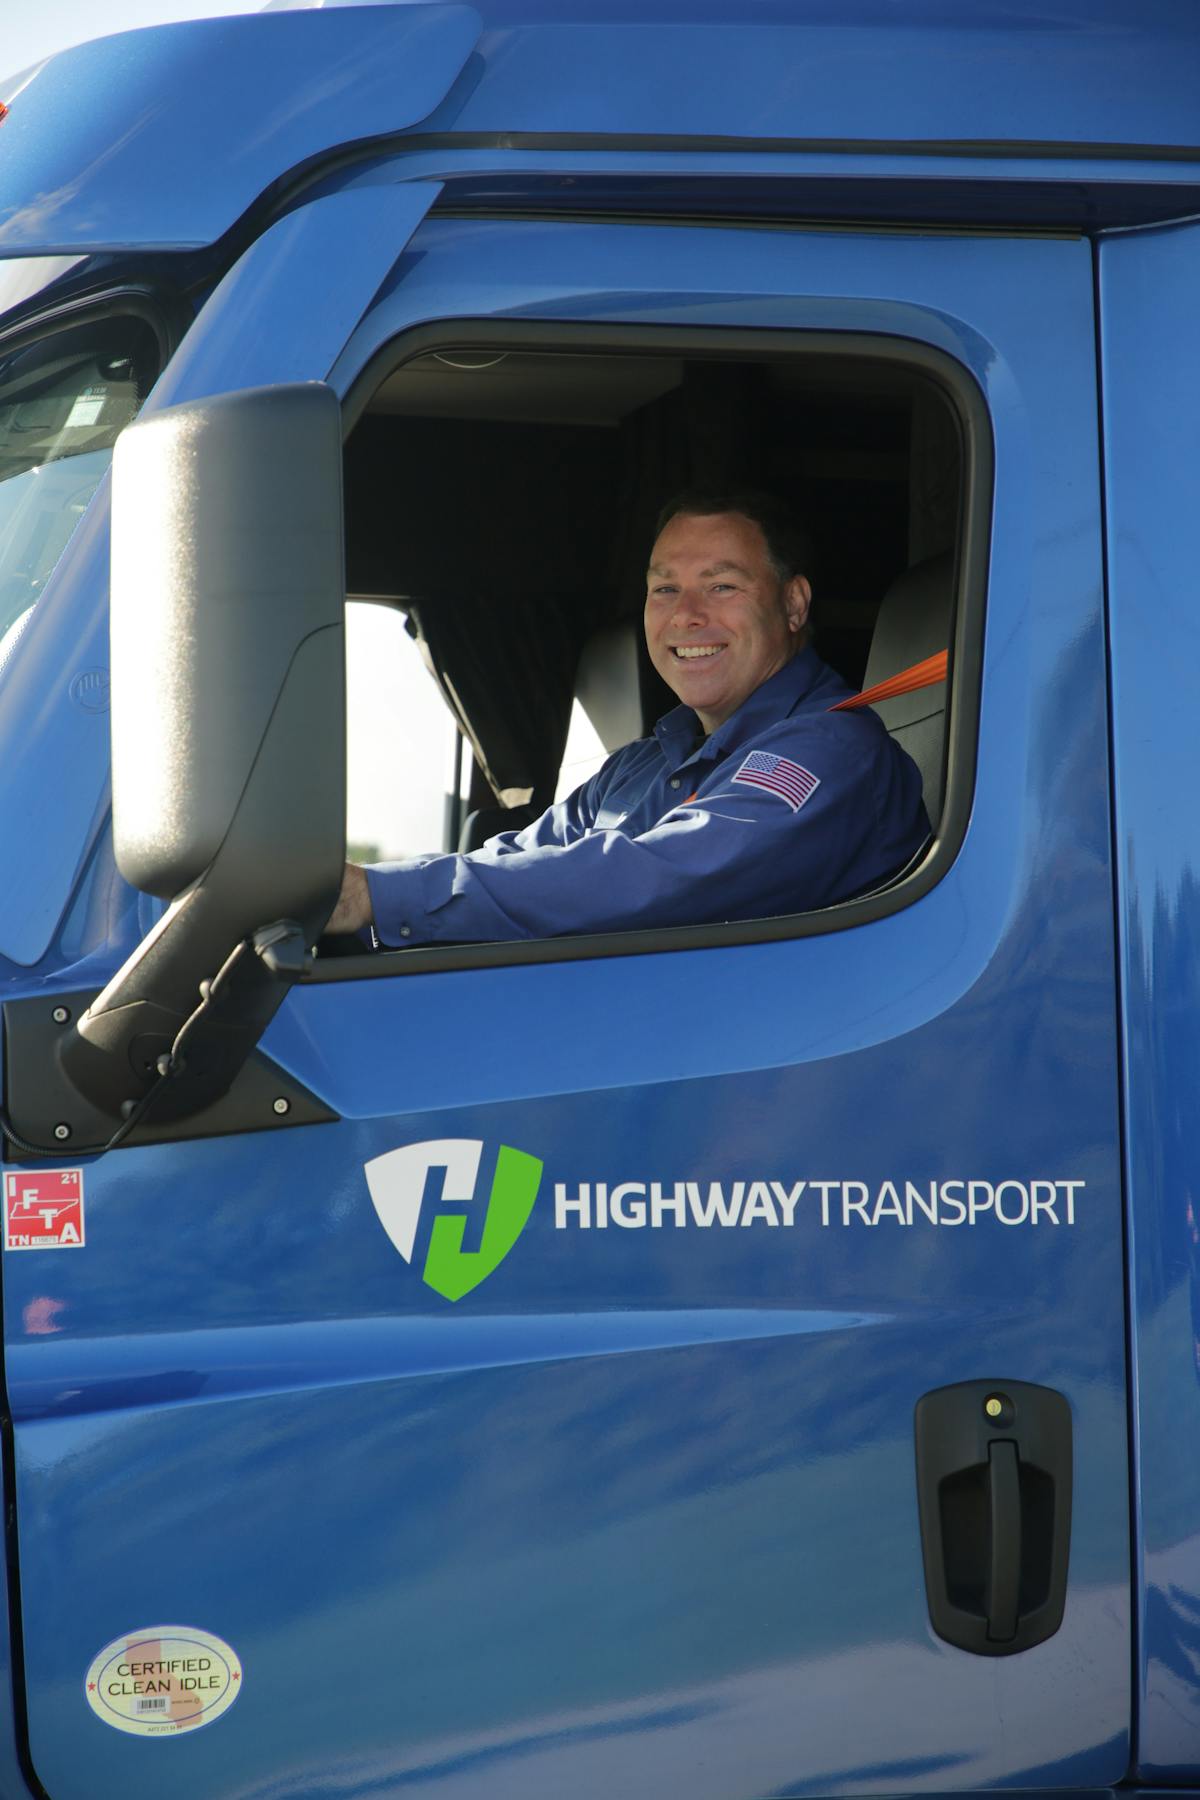 Highway Transport driver Tom Frain recently was selected as one of eight finalists for National Tank Truck Carriers&rsquo; 2021-22 Professional Tank Truck Driver of the Year award.